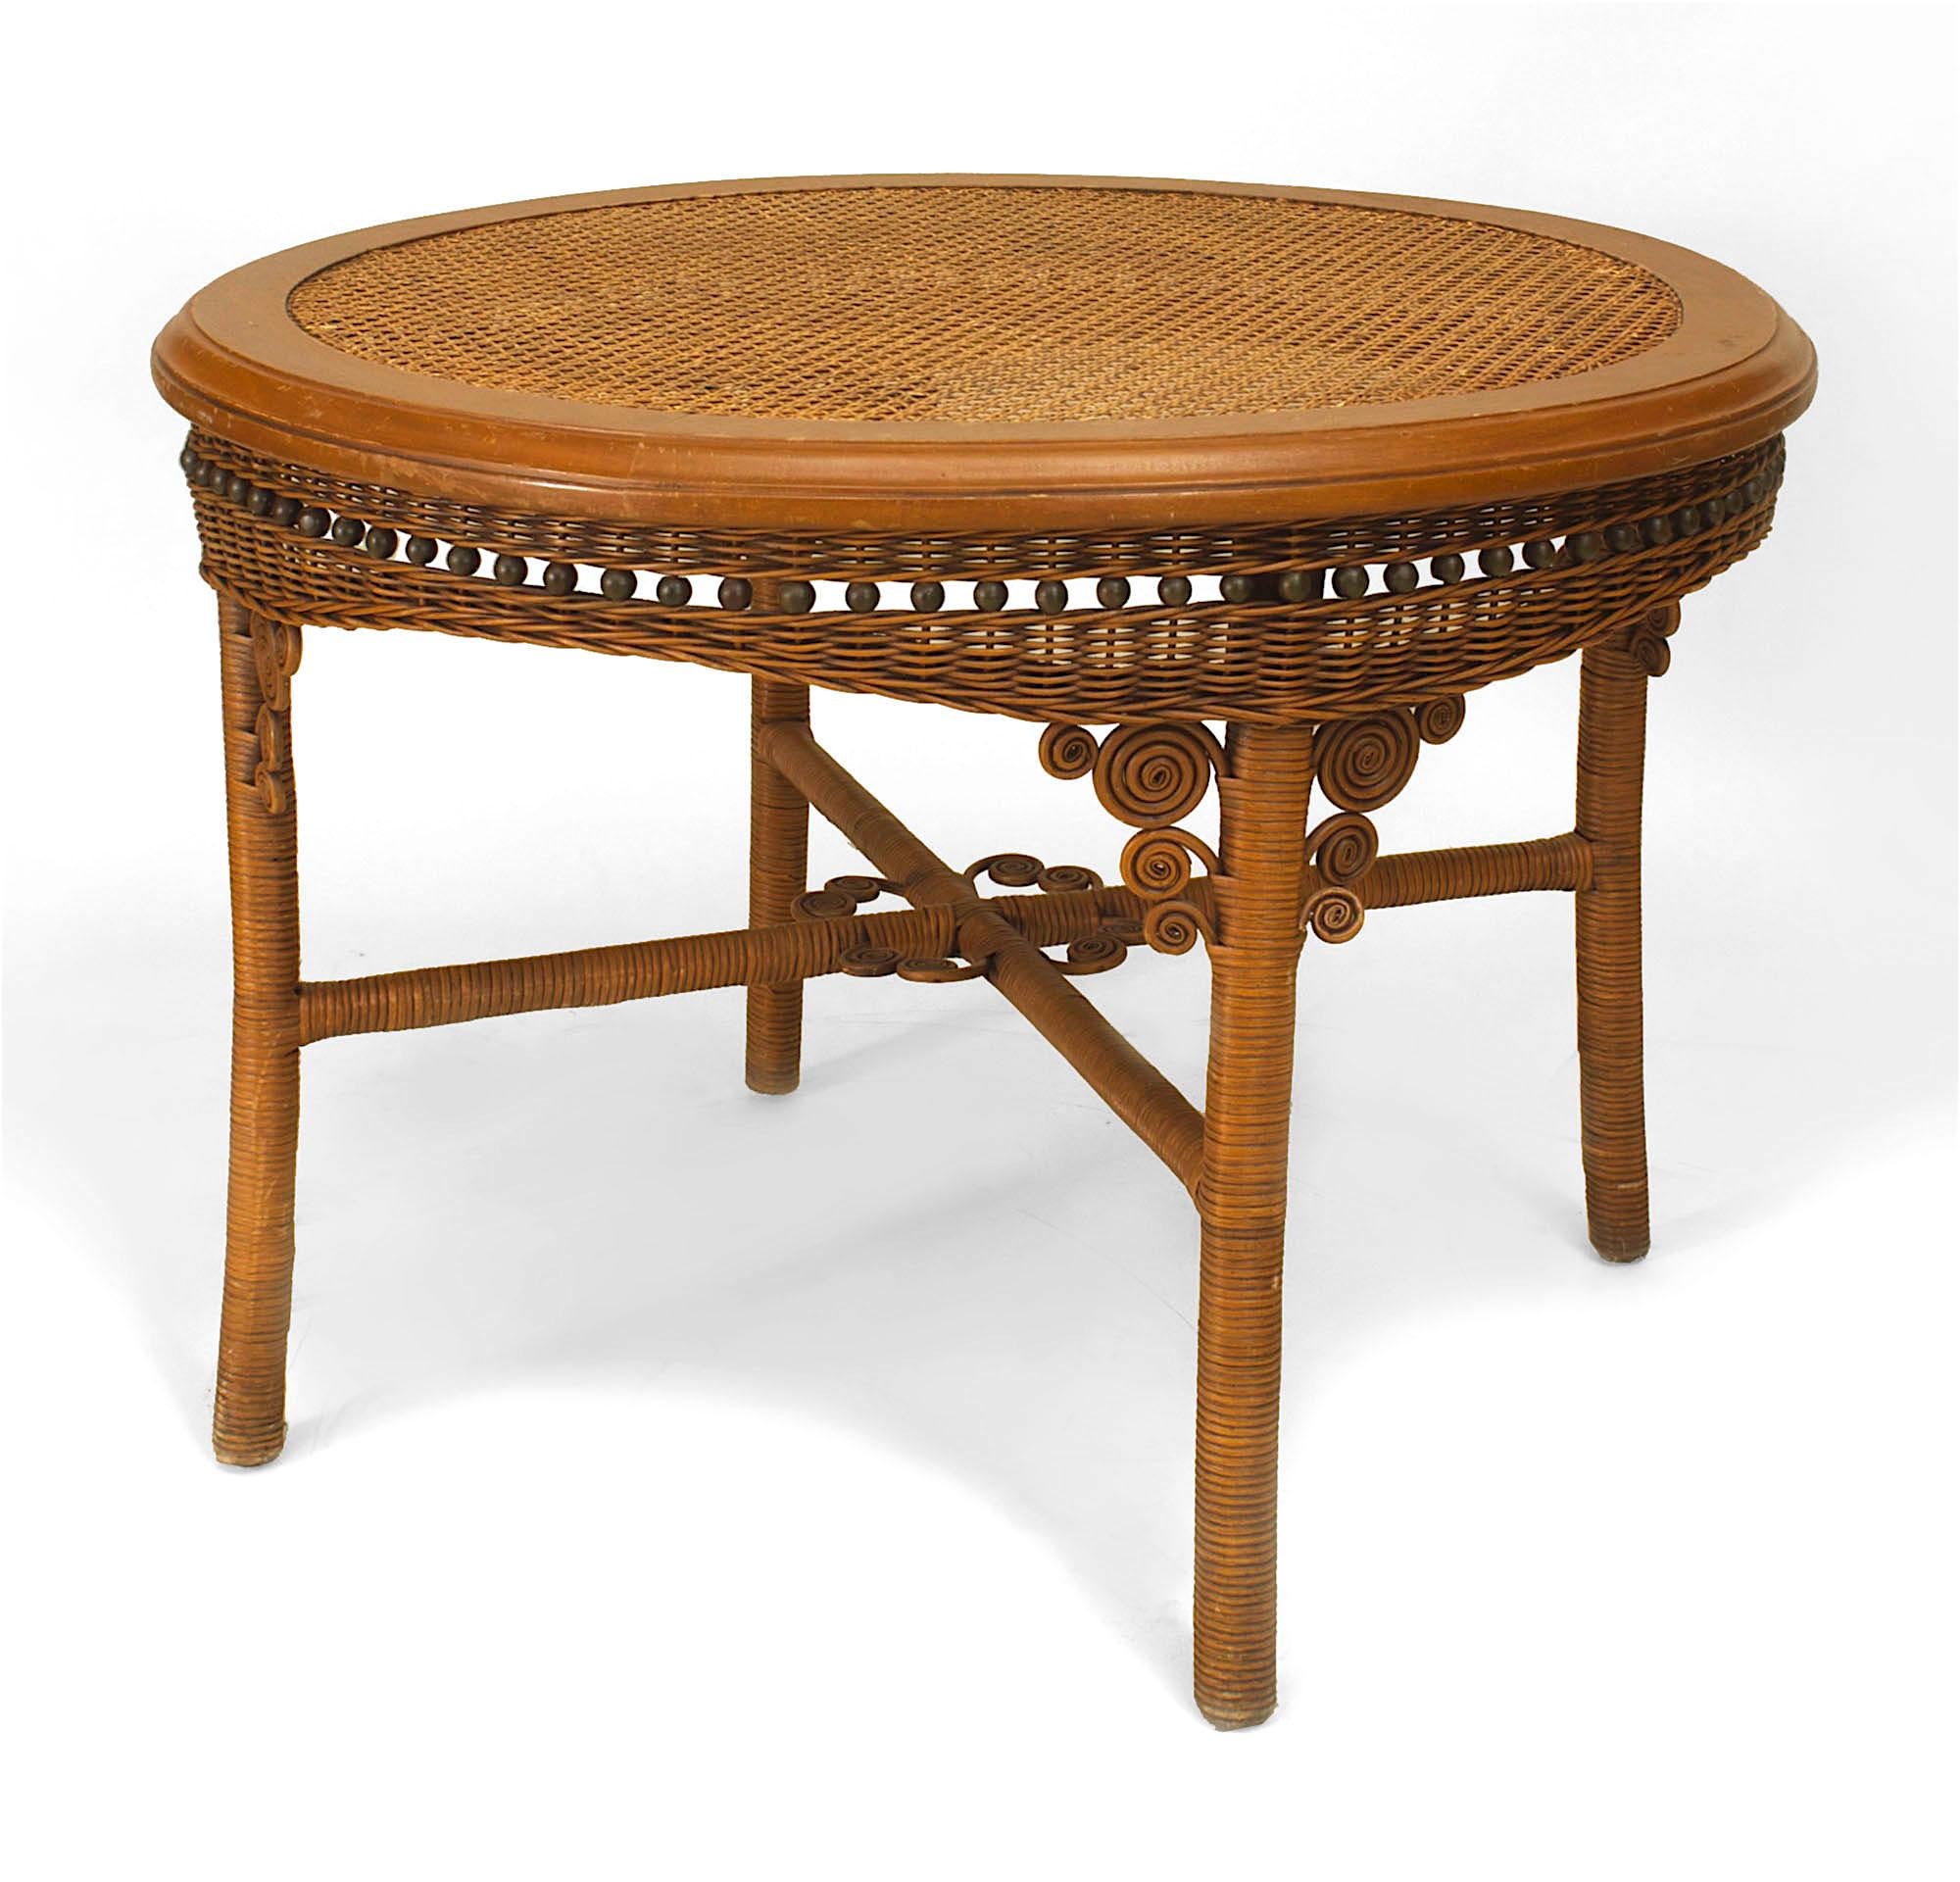 American Victorian natural wicker dining table with a round glass top over a cane surface & a woven apron with scrolls & ball design and stretcher base (Related Items: 060483)
